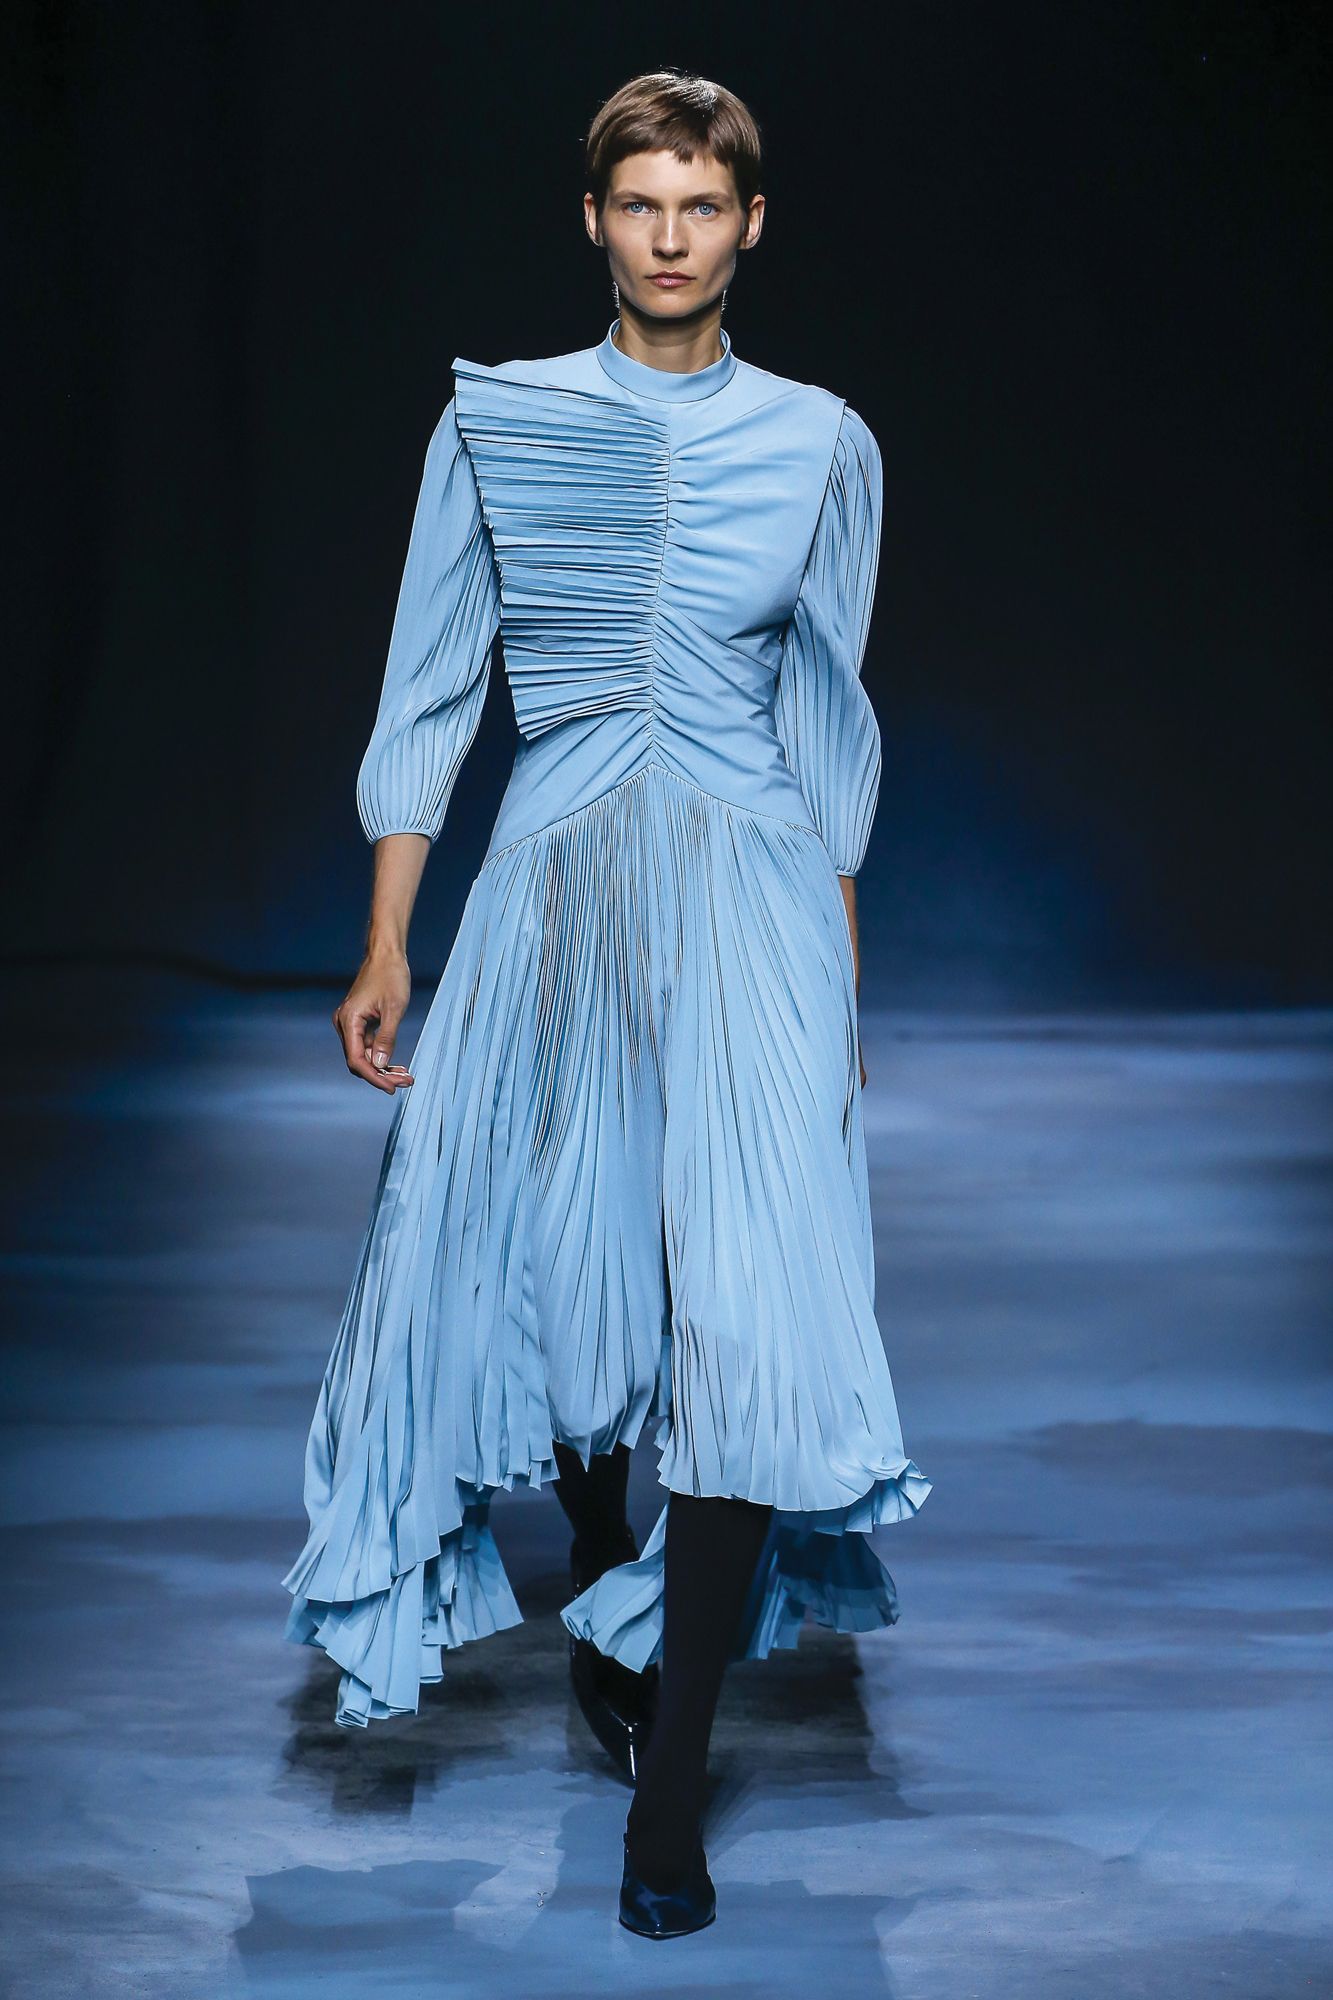 GIVENCHY | Asymmetrical pleated dress from the spring/summer 2019 runway